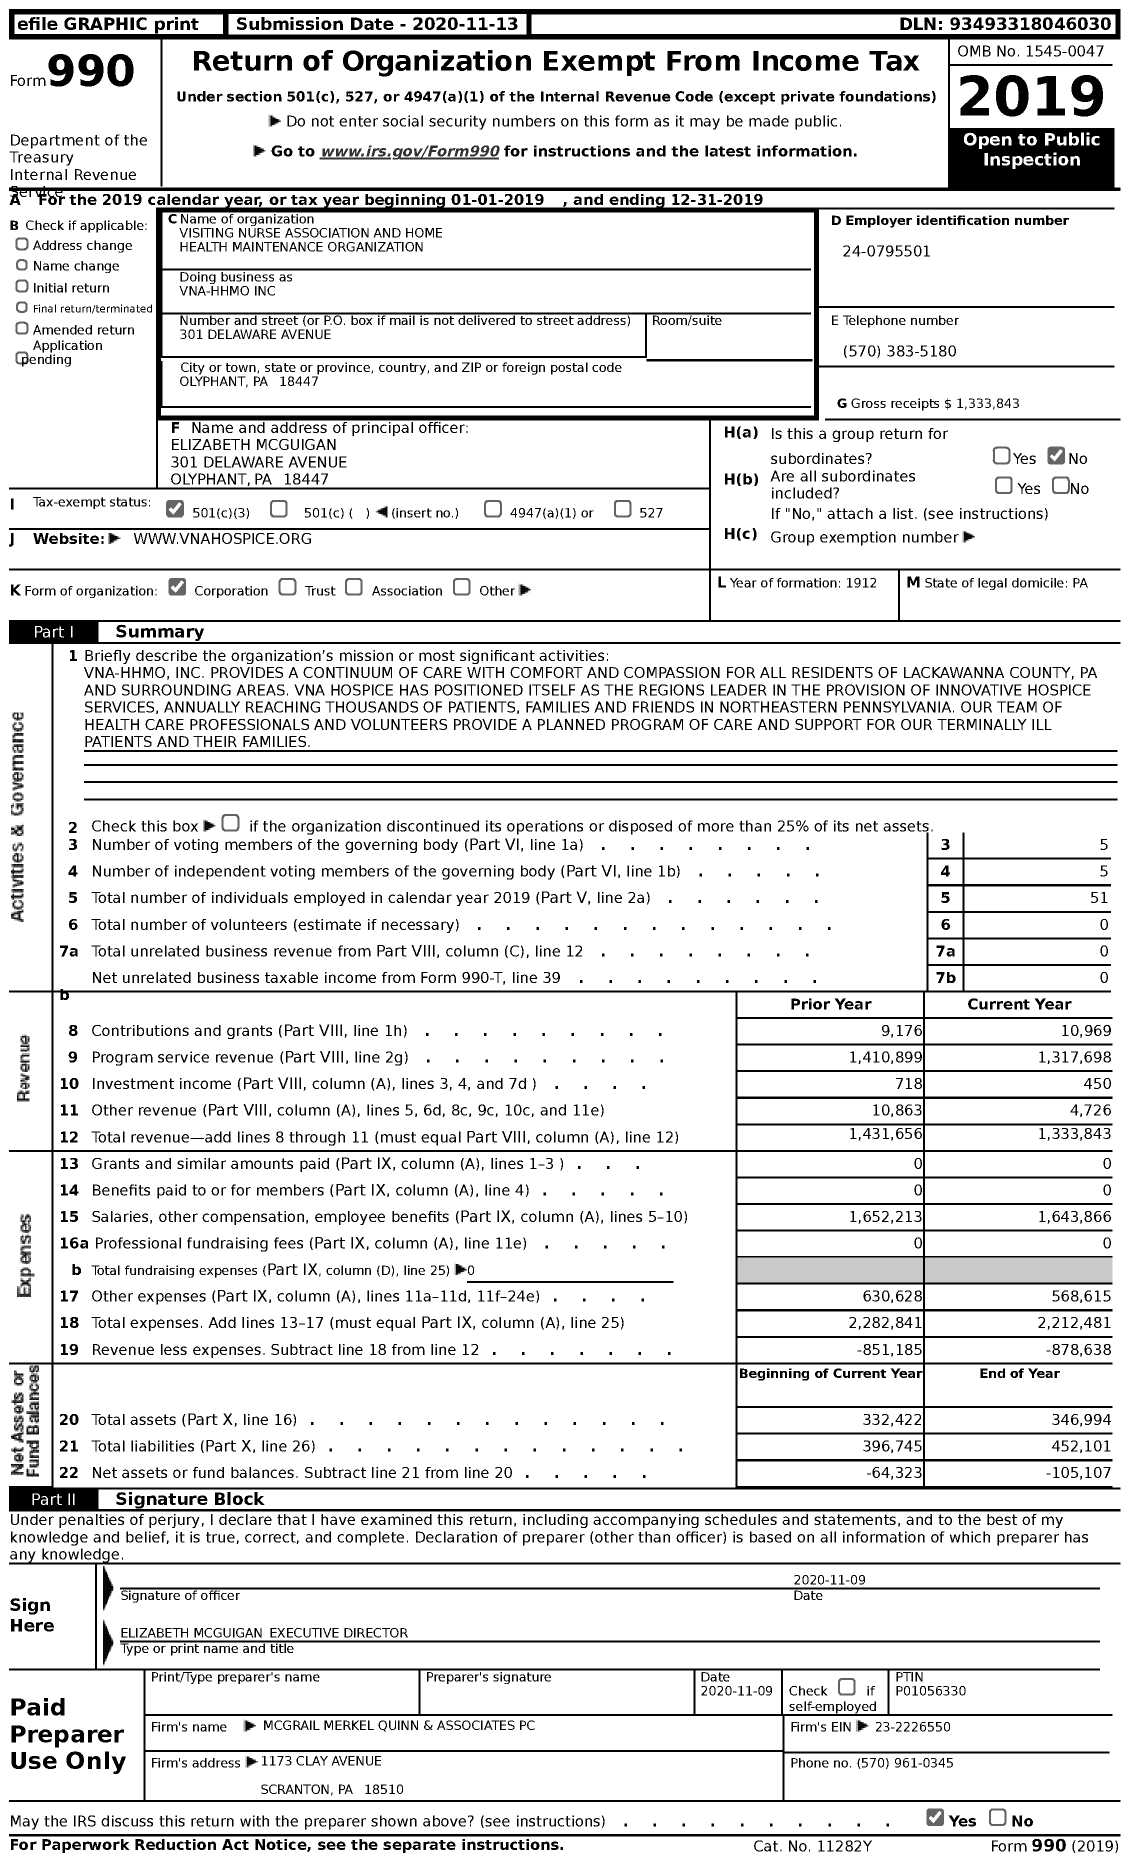 Image of first page of 2019 Form 990 for Visiting Nurse Association and Home Health Maintenance Organization (VNA-HHMO)